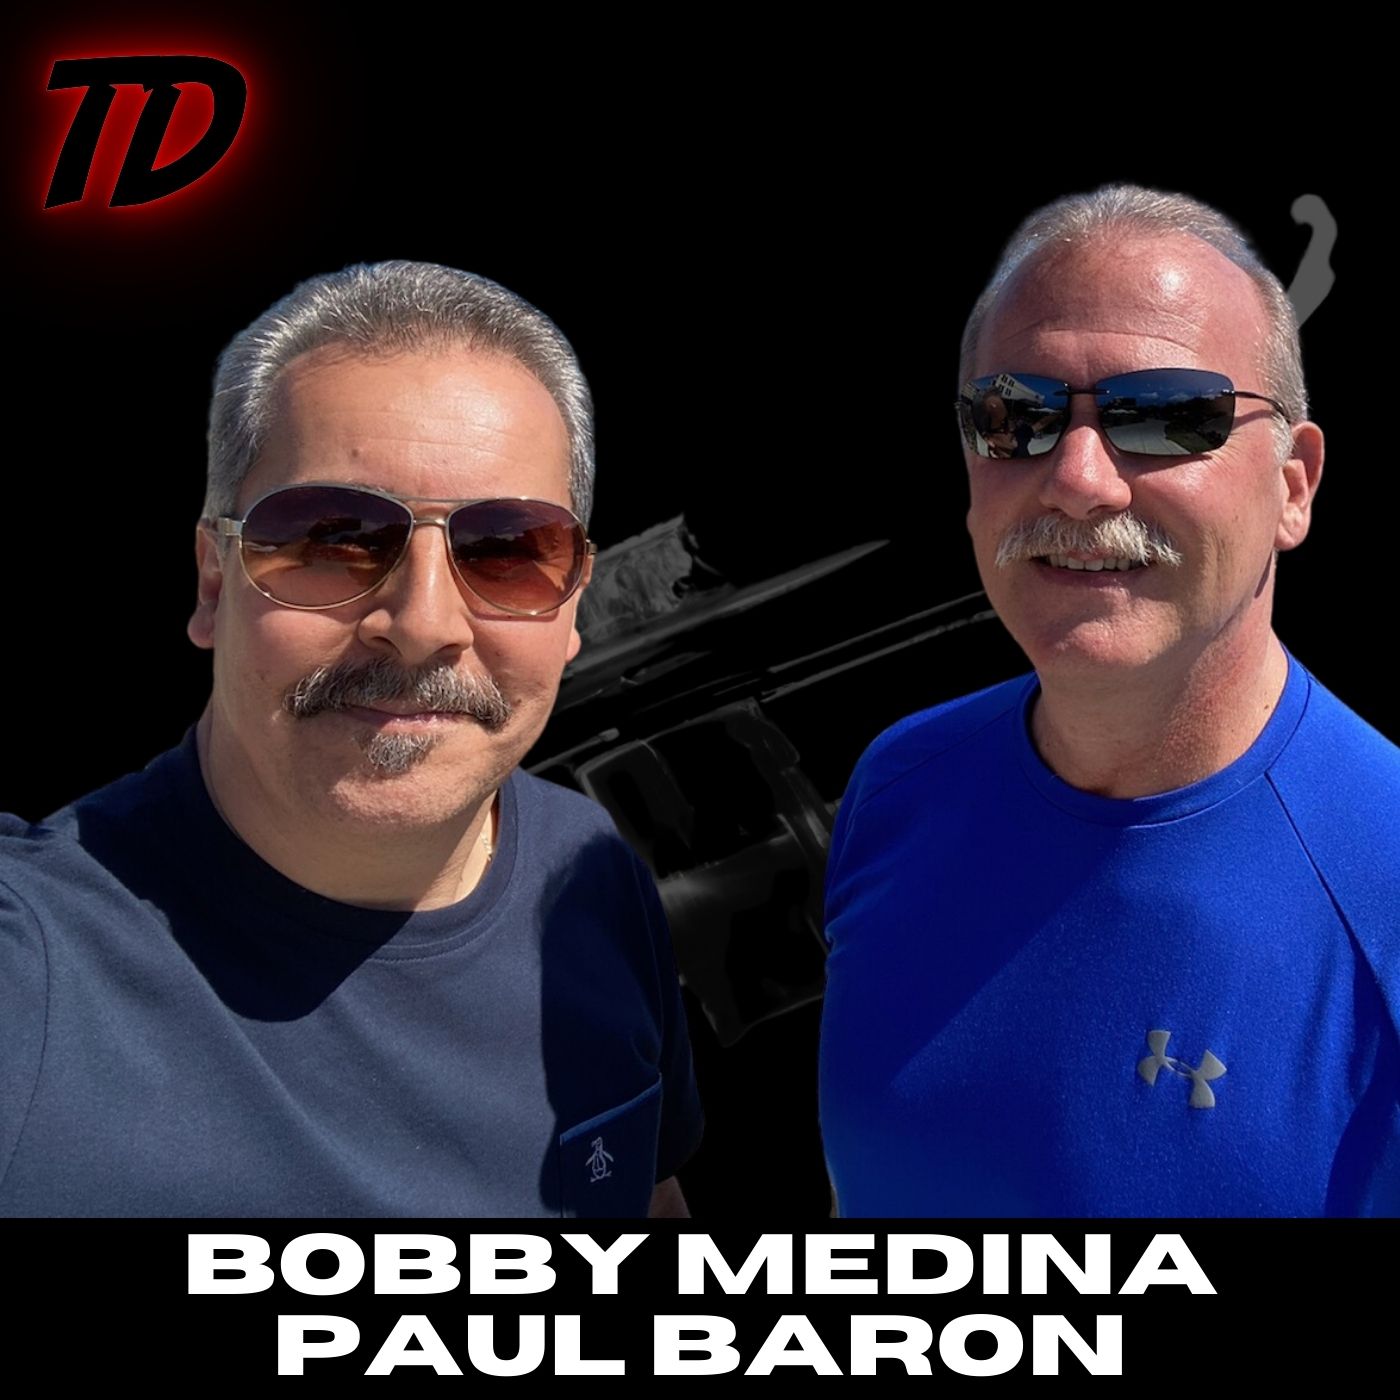 “Trumpet for Old Guys.” Two Seasoned Veterans Introduce New Training Regimen Focused on the Physiology of Age featuring Paul Baron and Bobby Medina